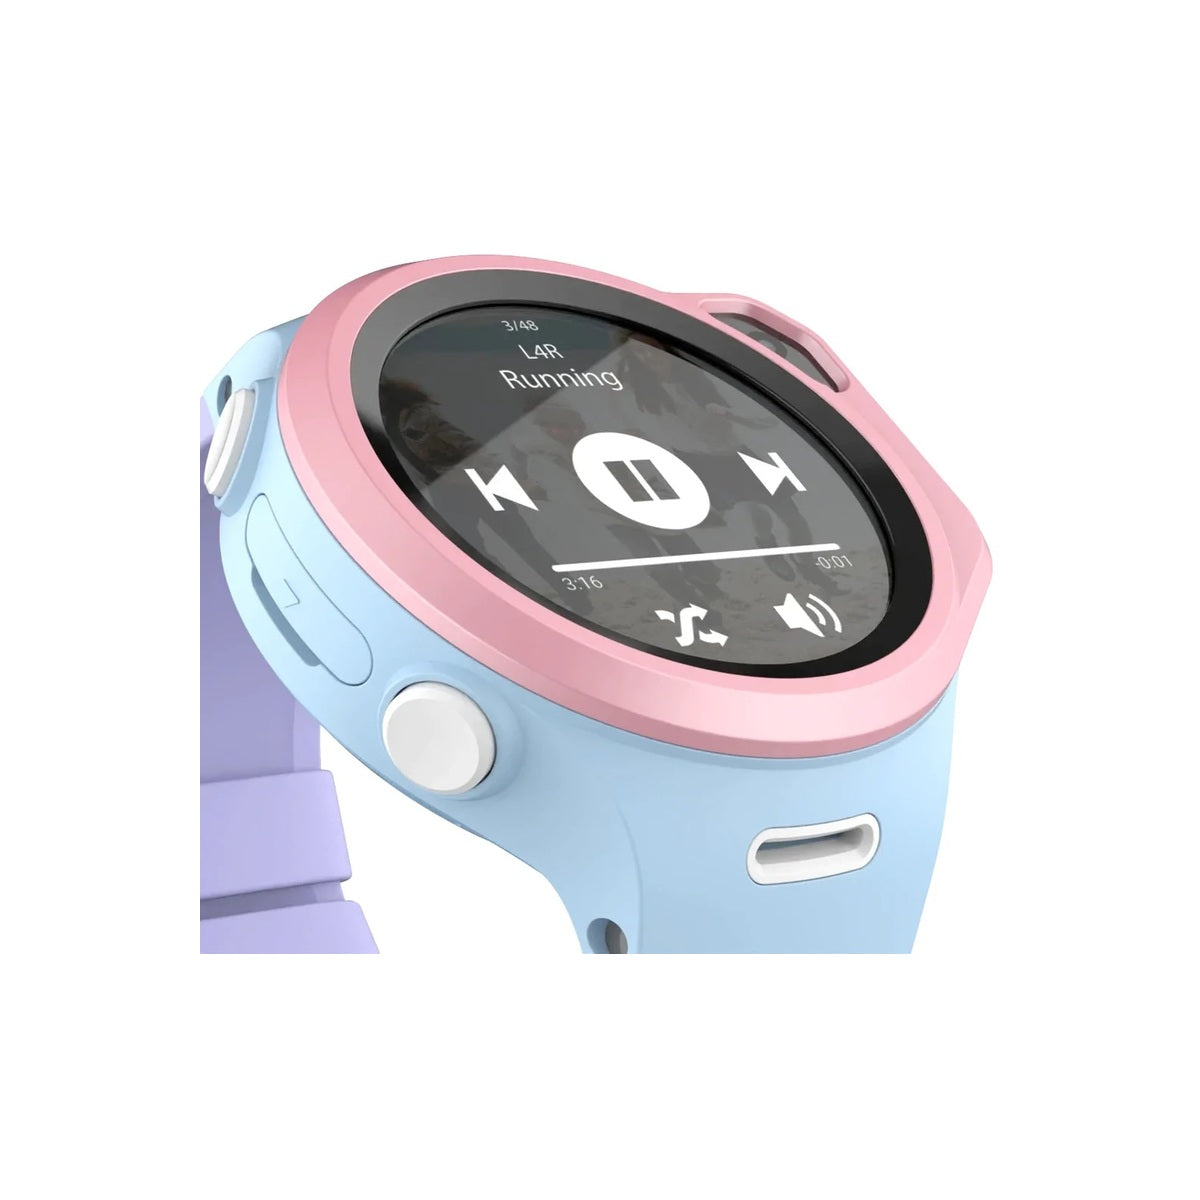 MyFirst Fone R1s All- in-One Smartwatch for Kids - Heart monitoring, GPS, WiFi, 4G, nanoSIM, Music Player, Camera in Cotton Candy